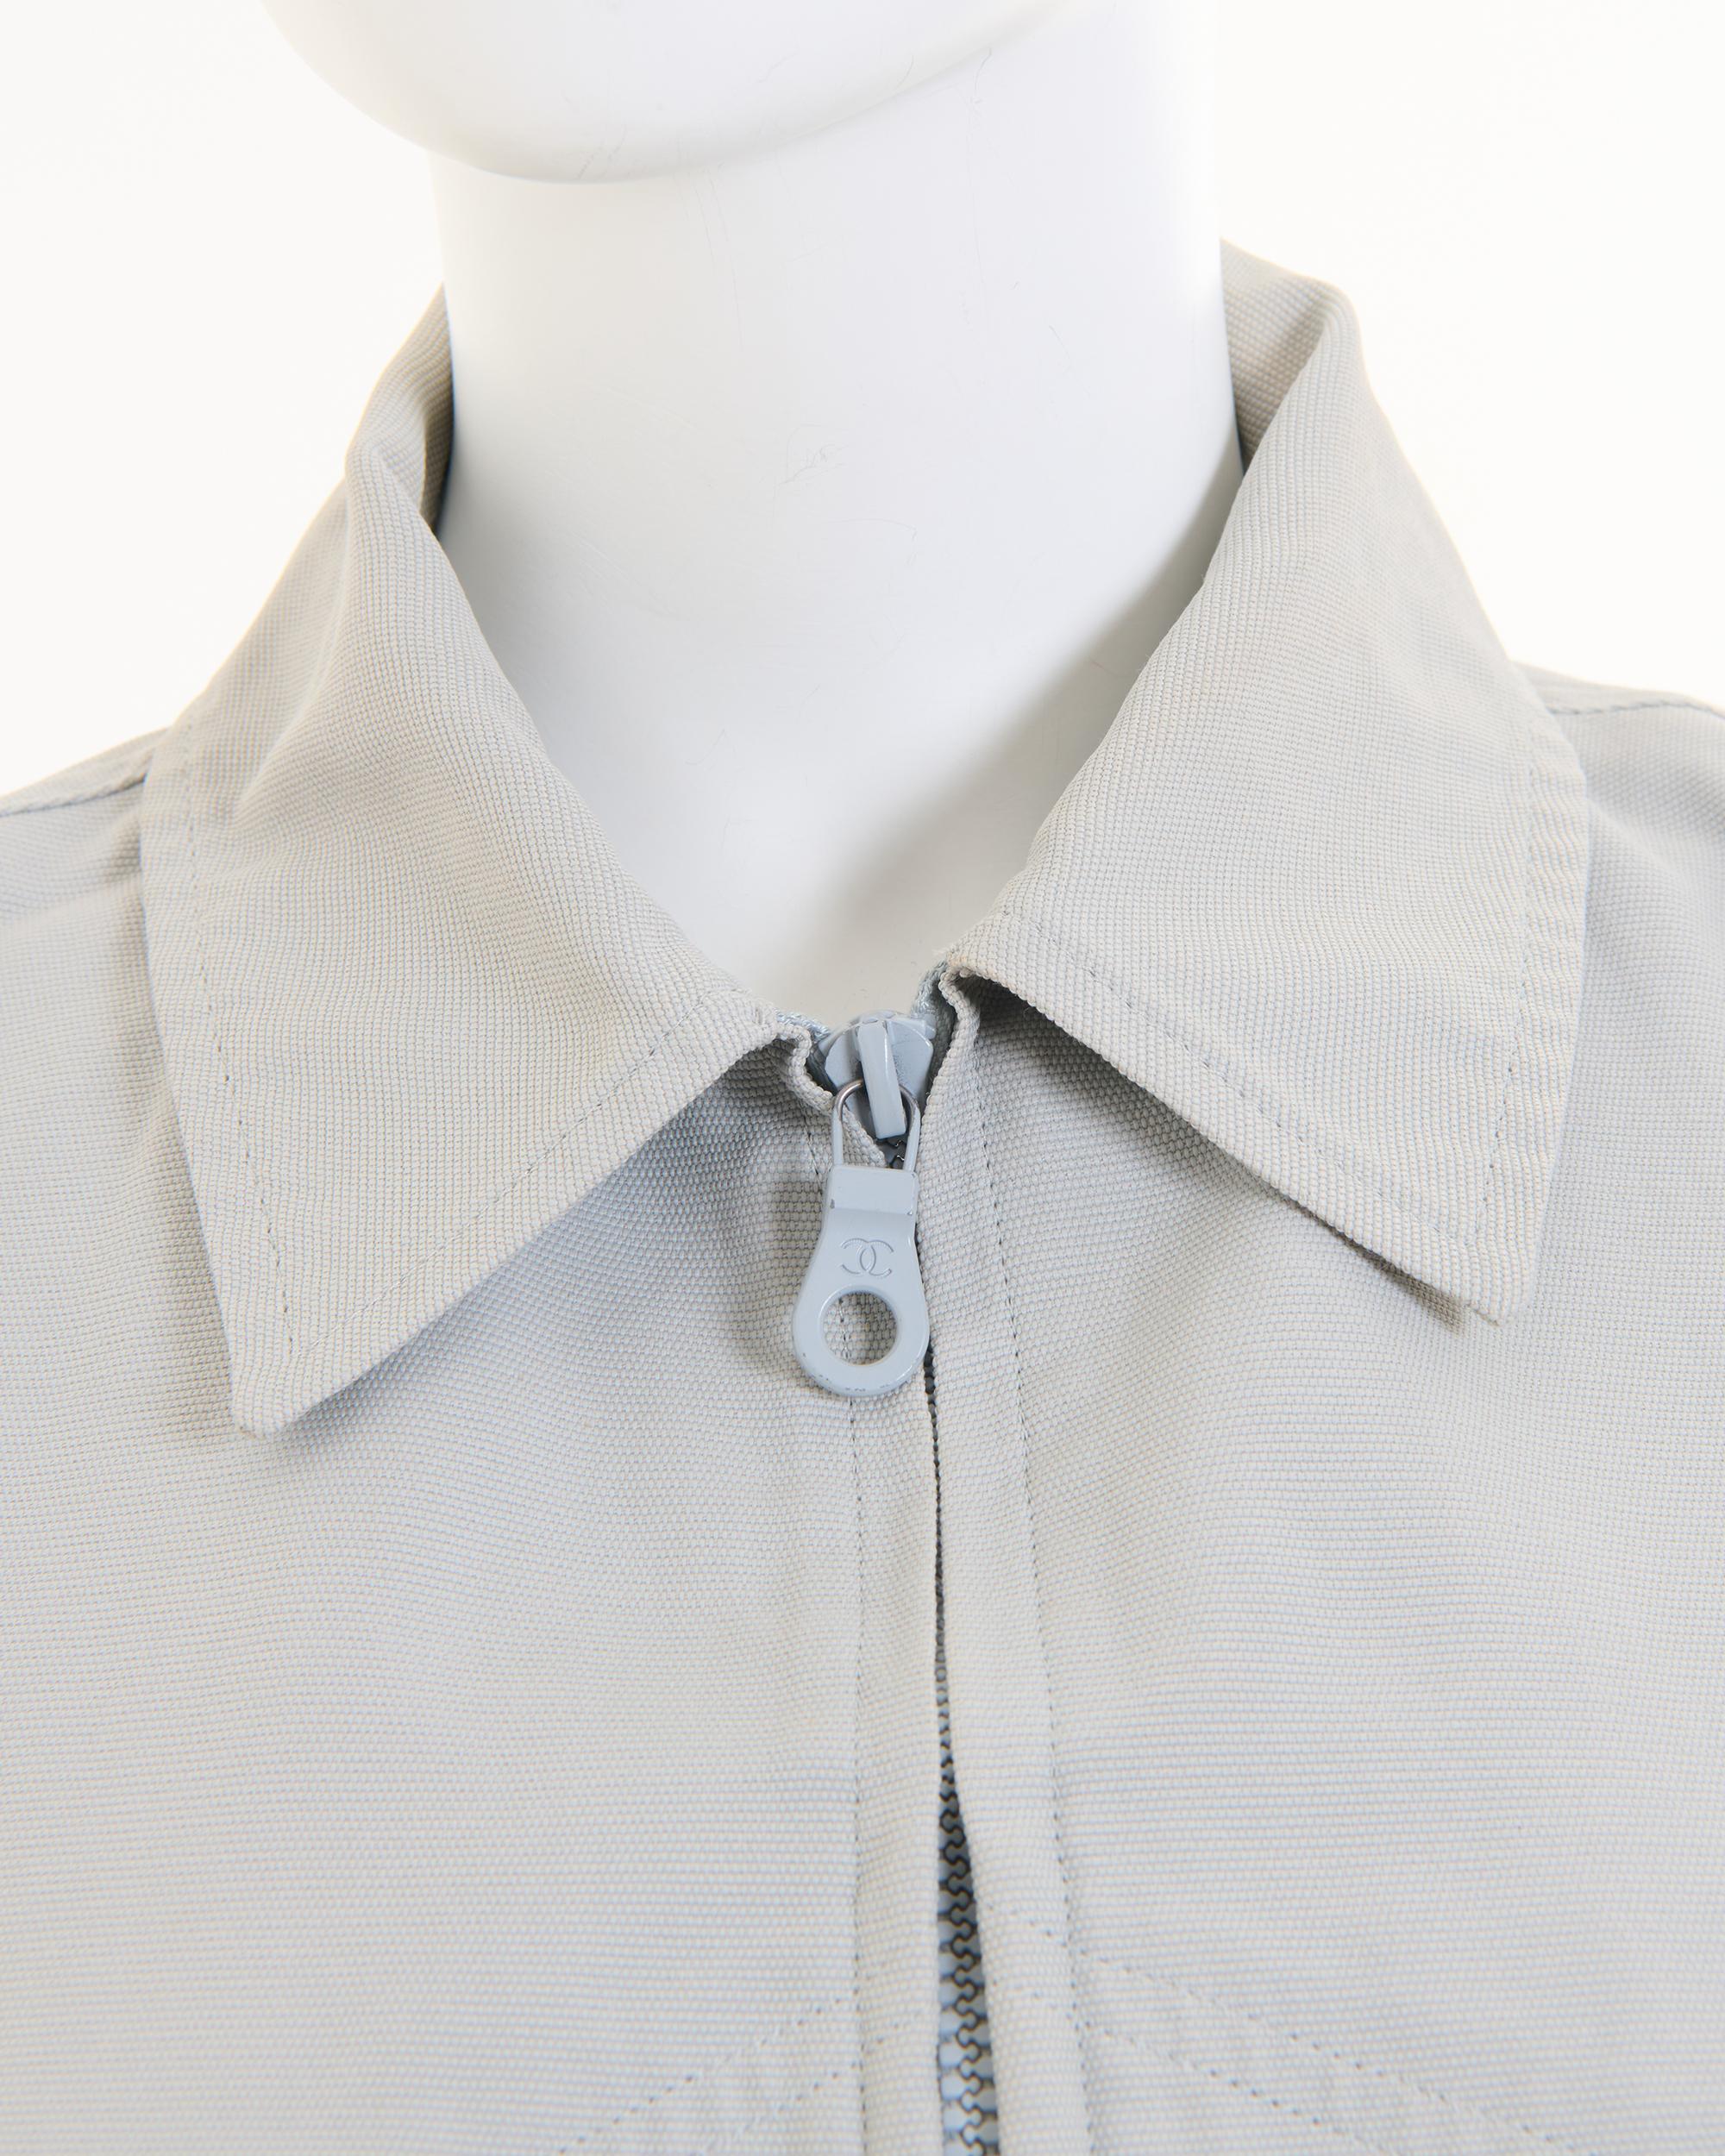 Chanel by Karl Lagerfeld F/W 2001 Dove gray and white zip-up sport jacket  For Sale 2